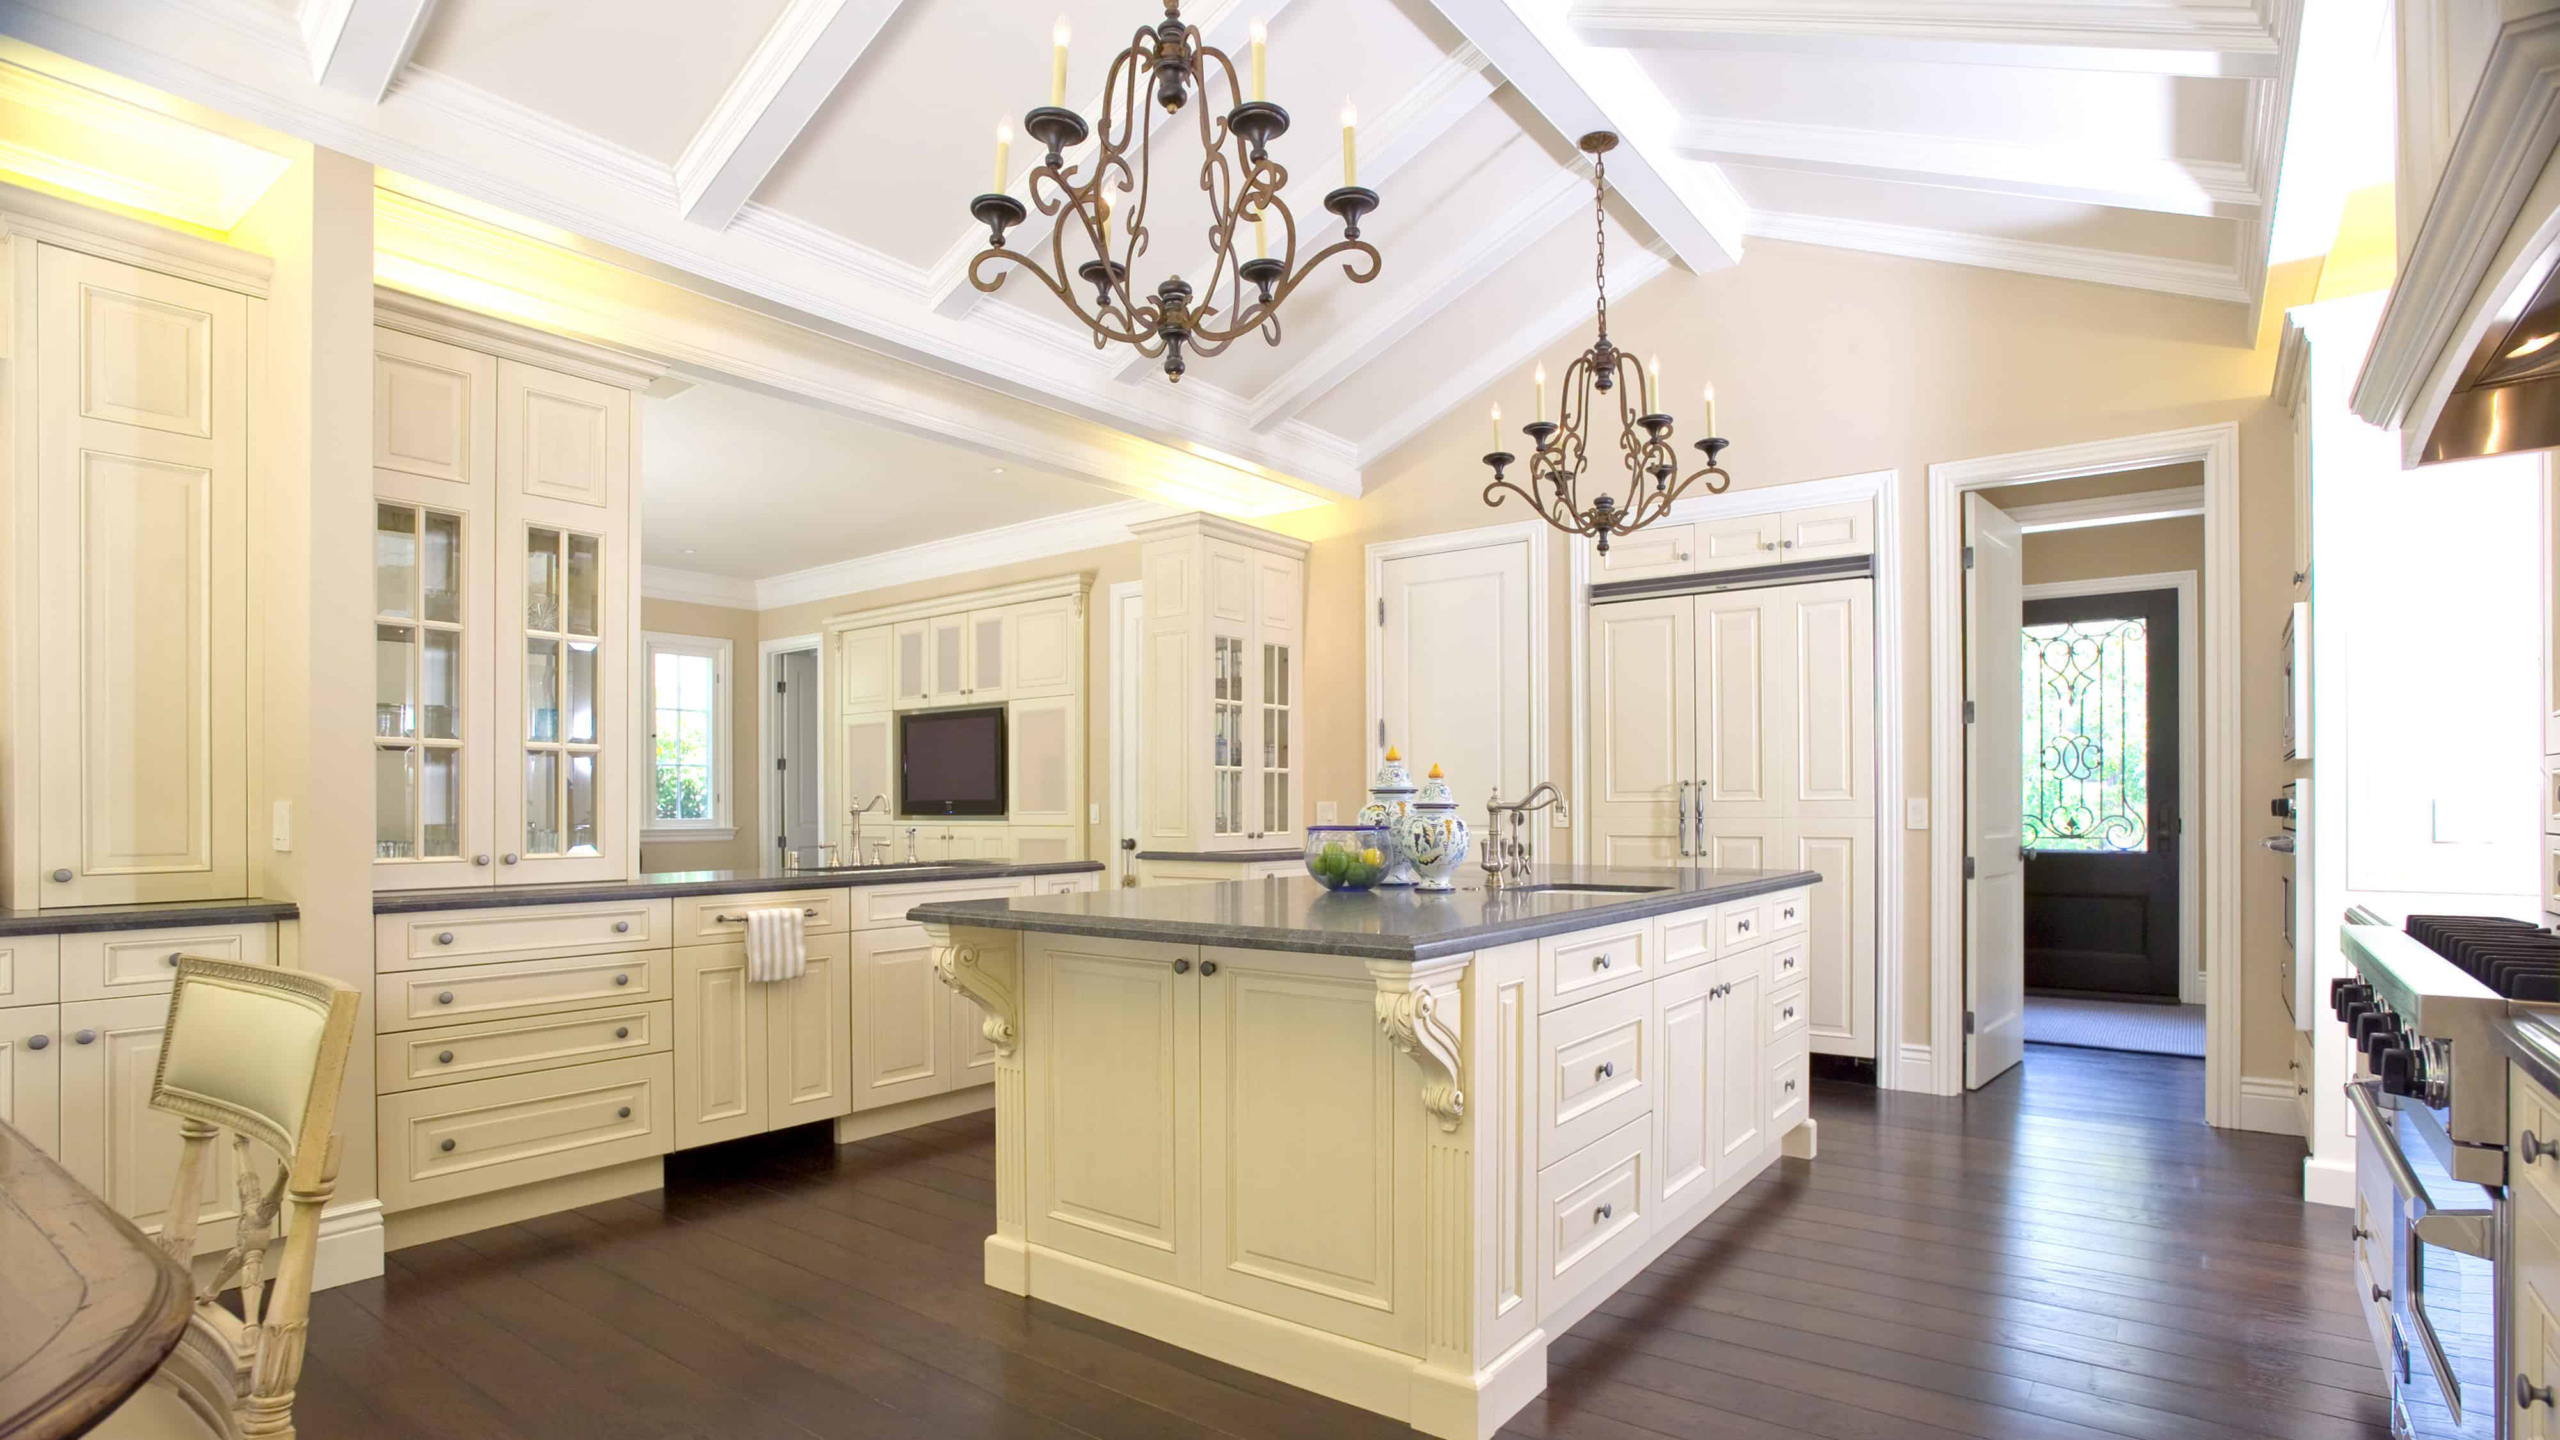 Ornate kitchen with large island and dark wood floors.